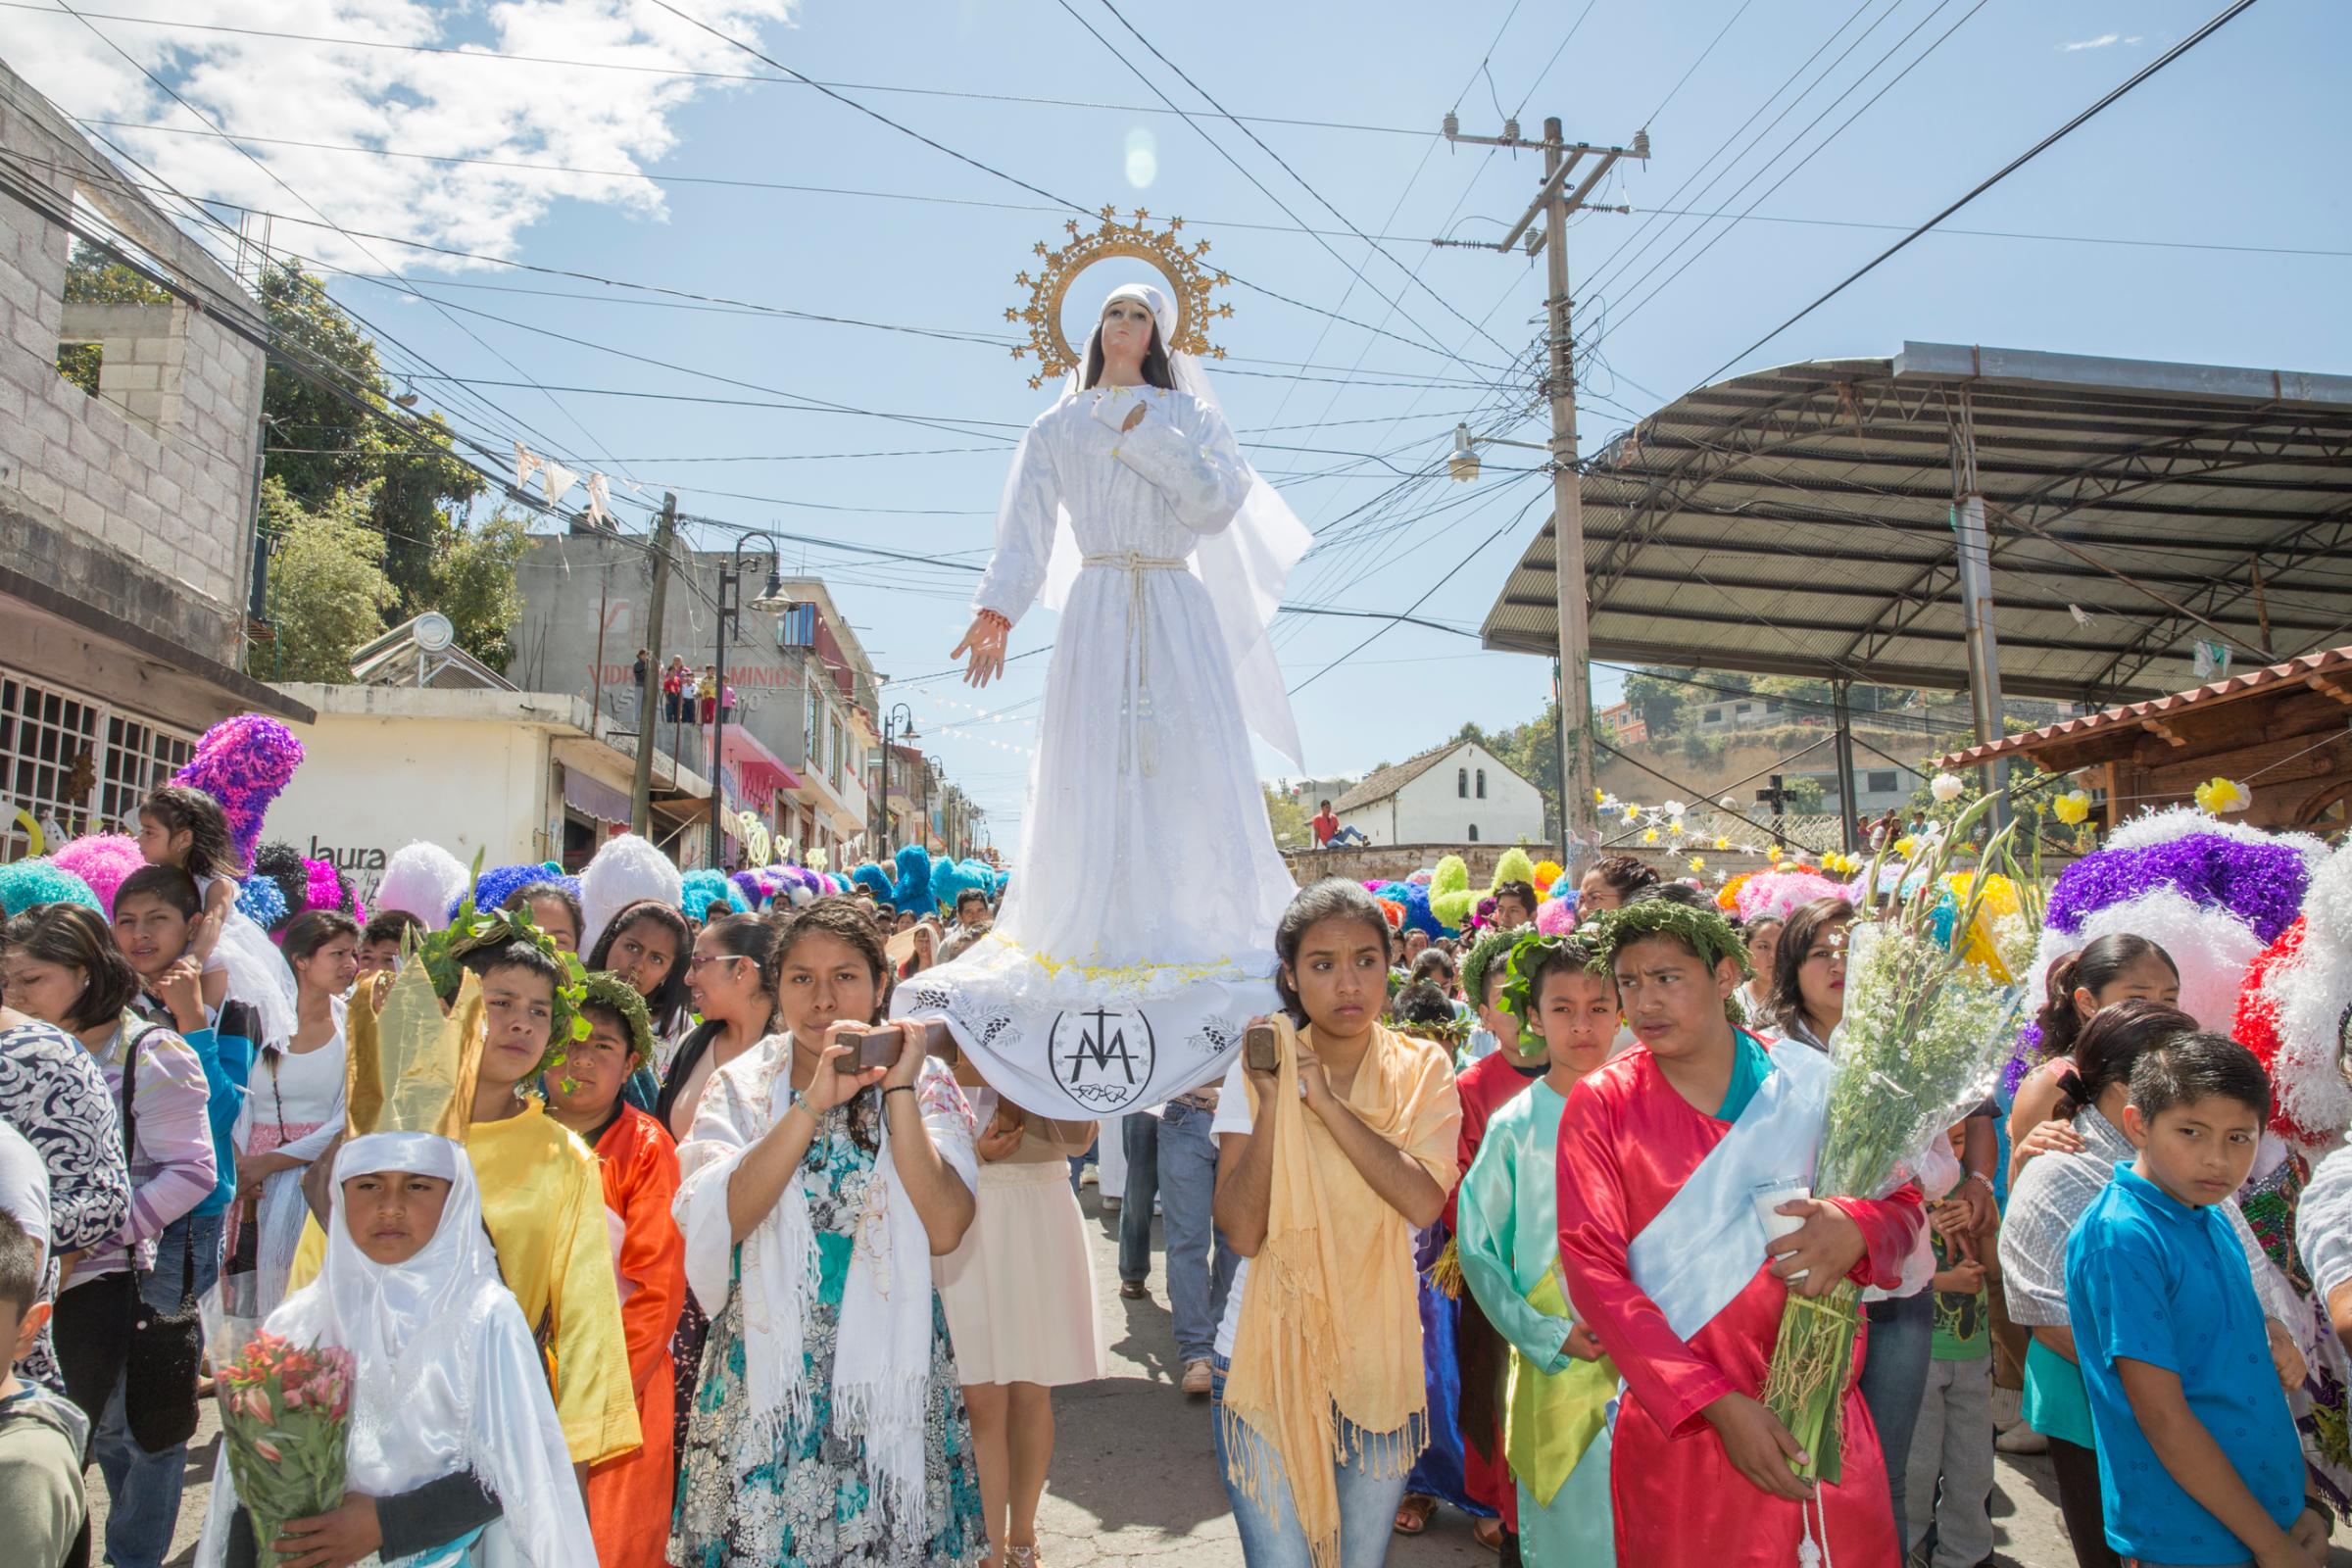 Believers carry the statue of the Virgin Mary at the Sunday procession during Holy Week. Tetela del Volcan, Morelos, Mexico.